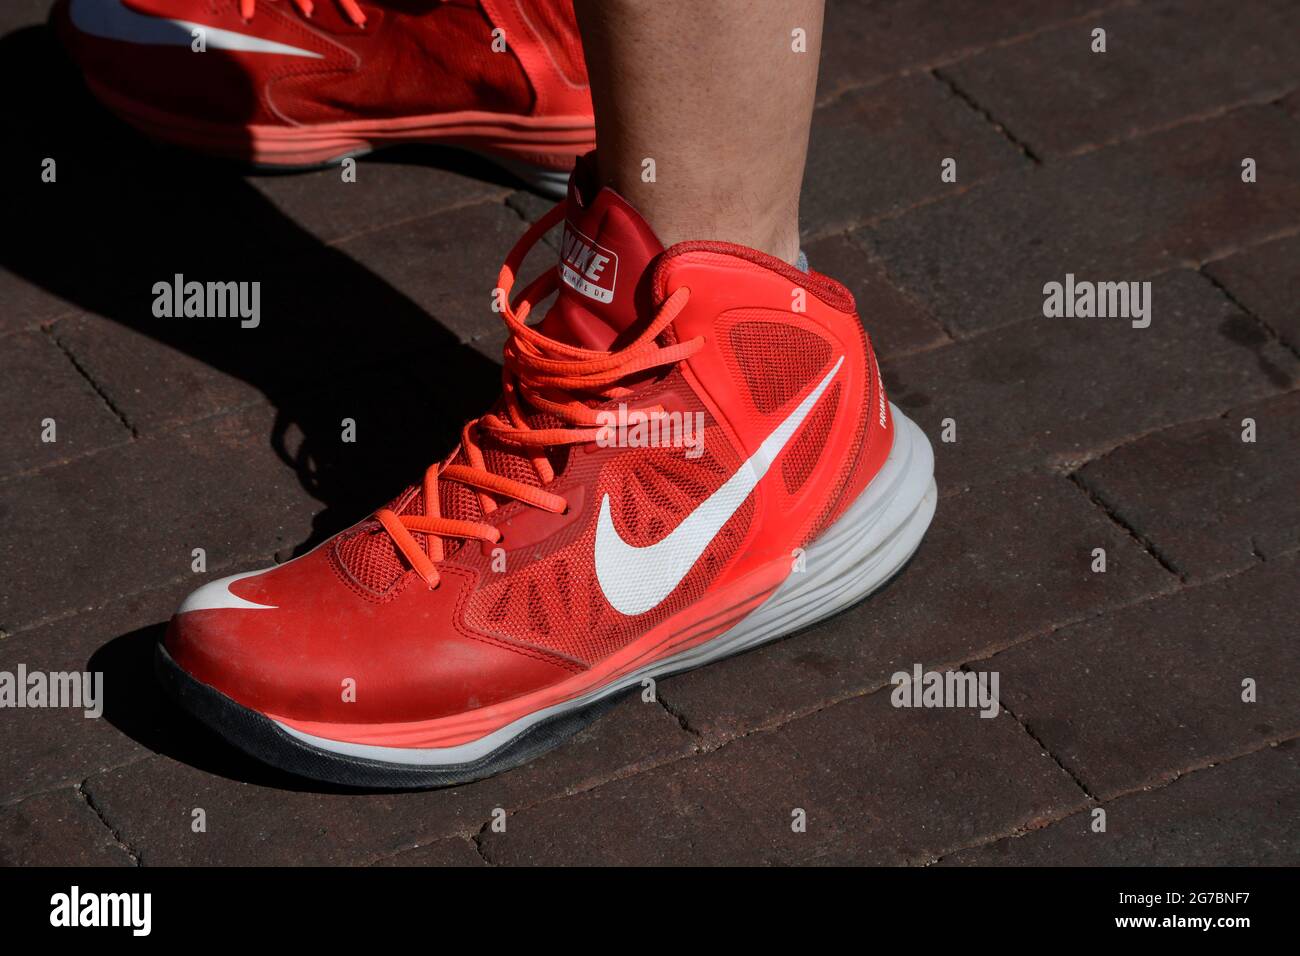 A red nike tennis shoes man wears a pair of red Nike Prime Hype DF tennis or athletic